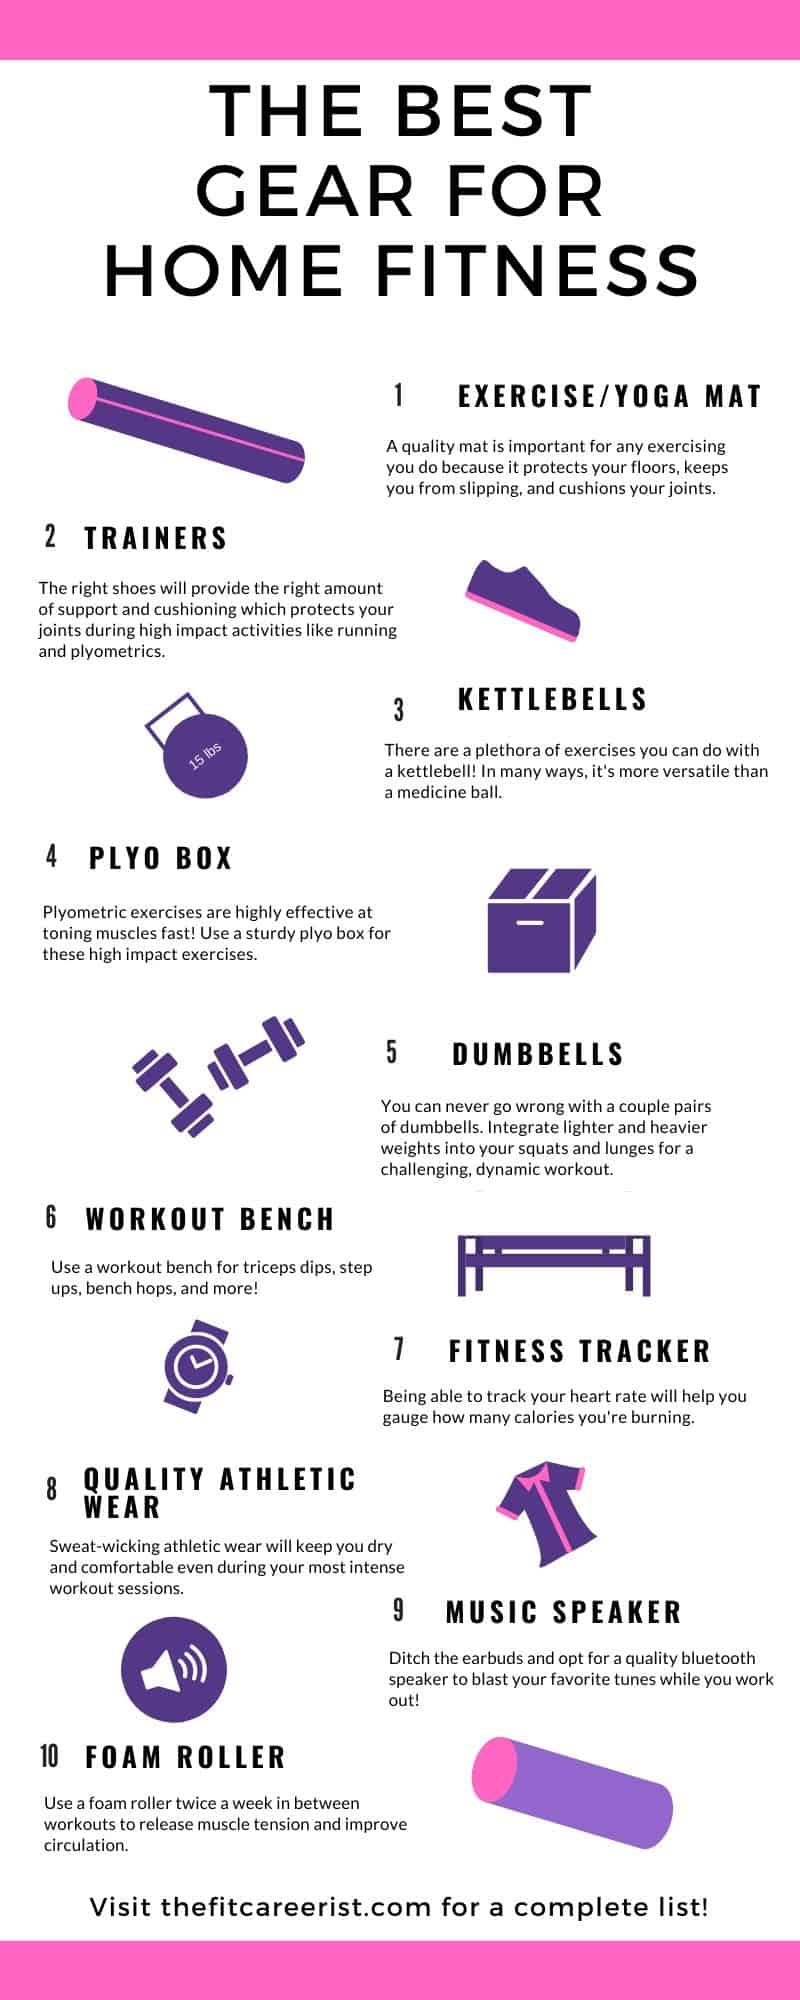 Home Fitness Gear